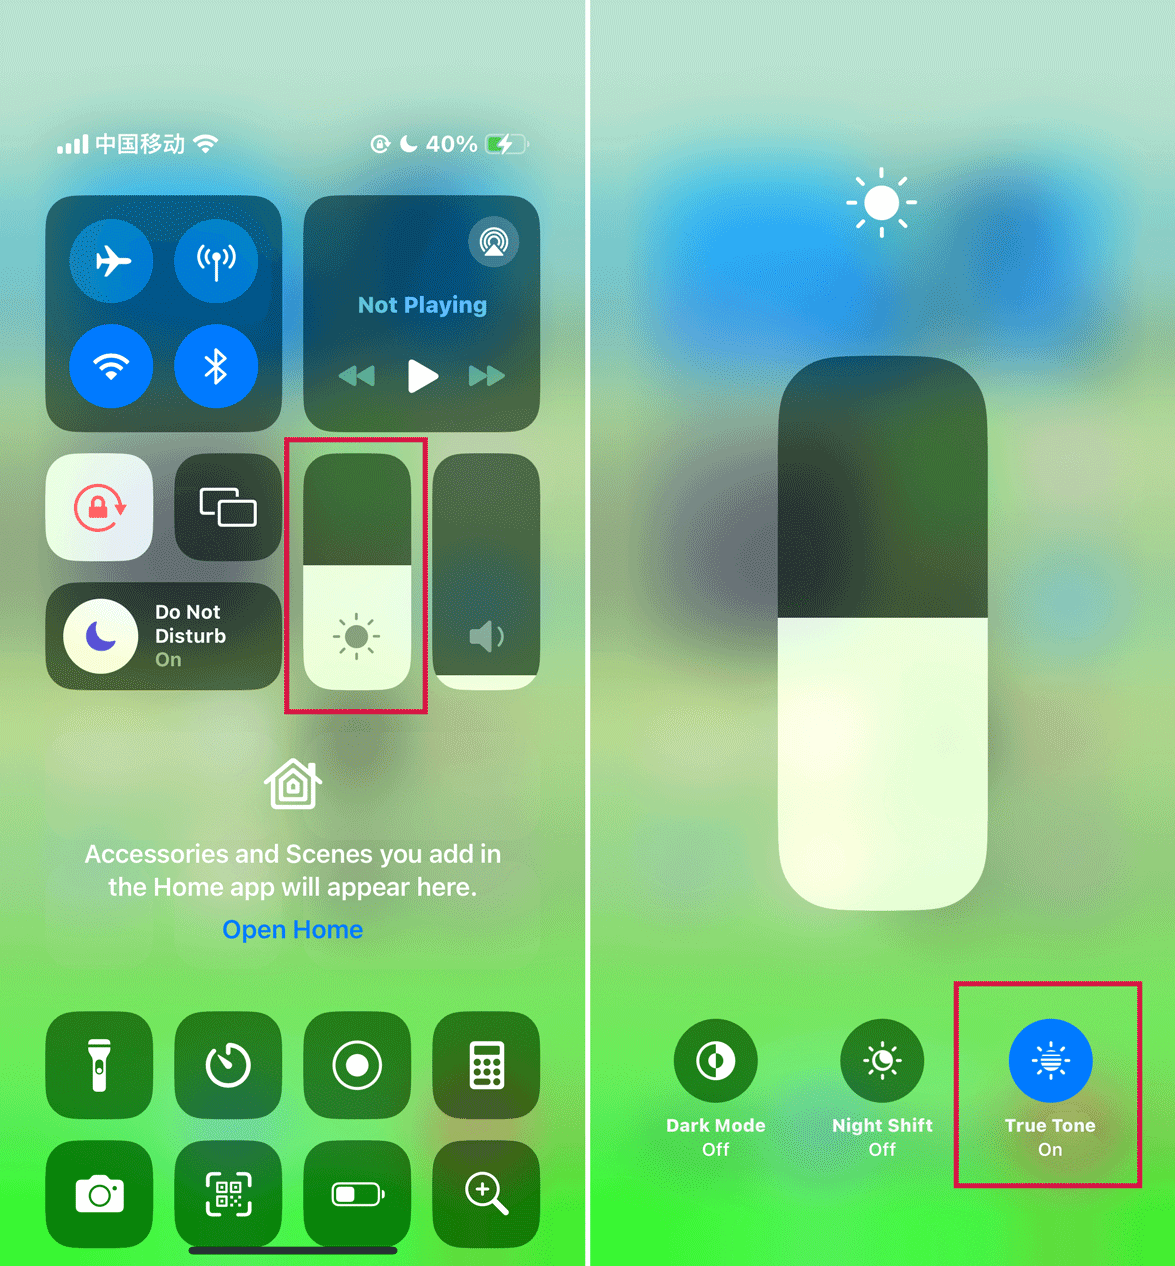 Steps to Enable or Disable True Tone Using Control Center on iphone